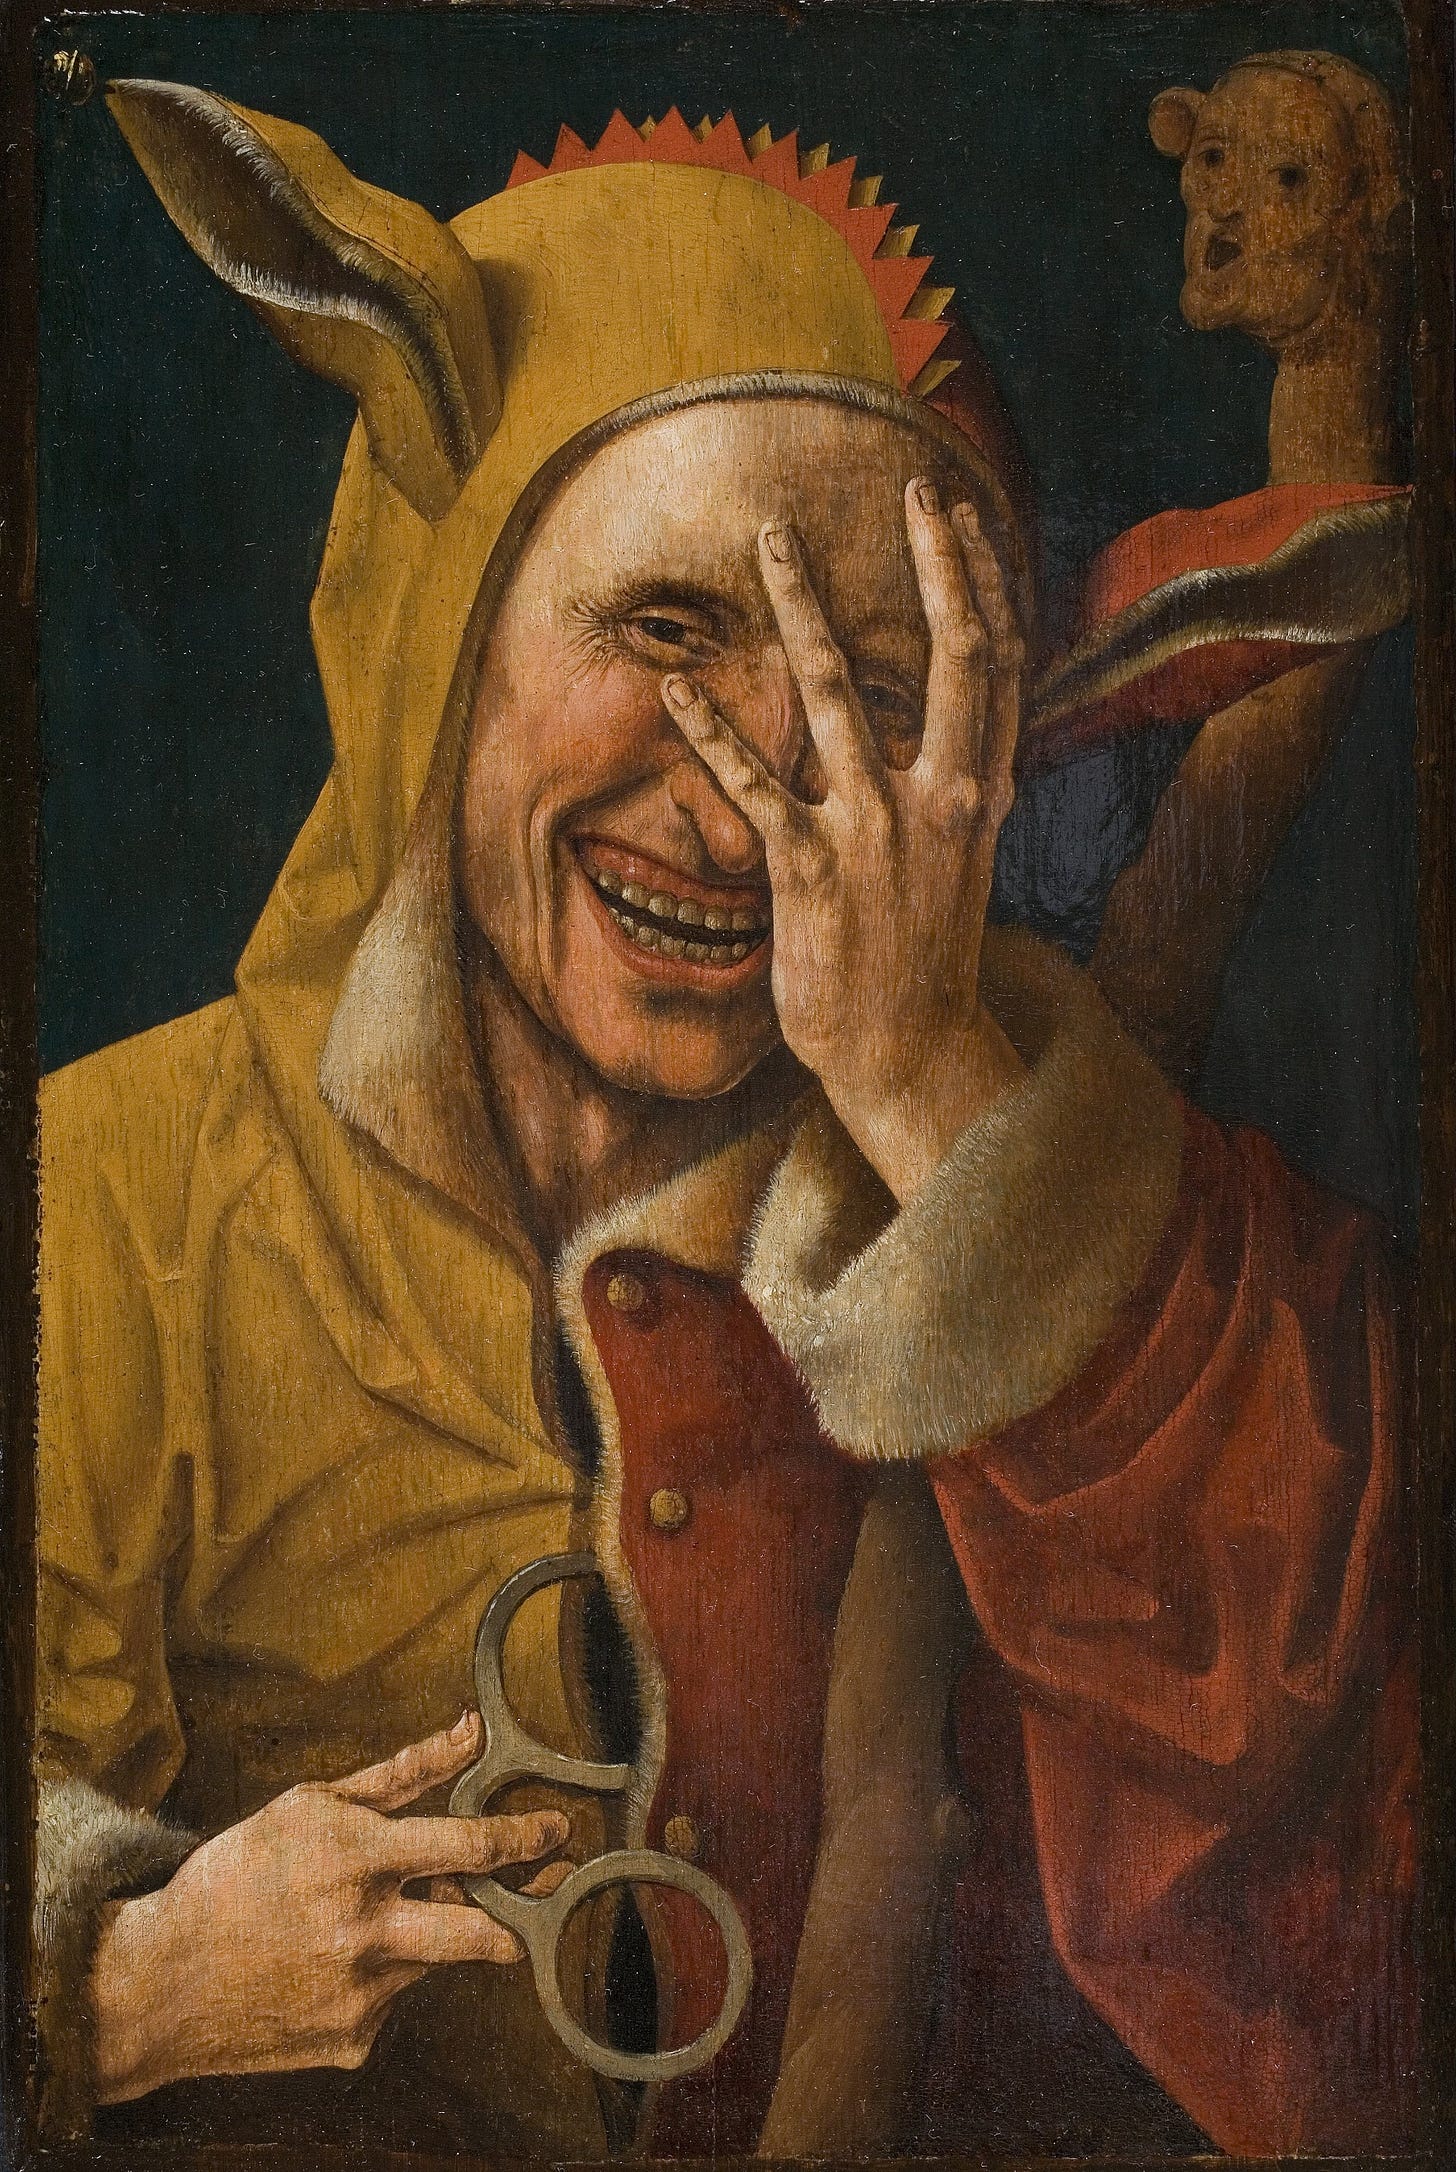 An old paiting of a man in a fool's cap with donkey ears. He is smiling and covering half his face. He pulls large spectacles from his motley costume